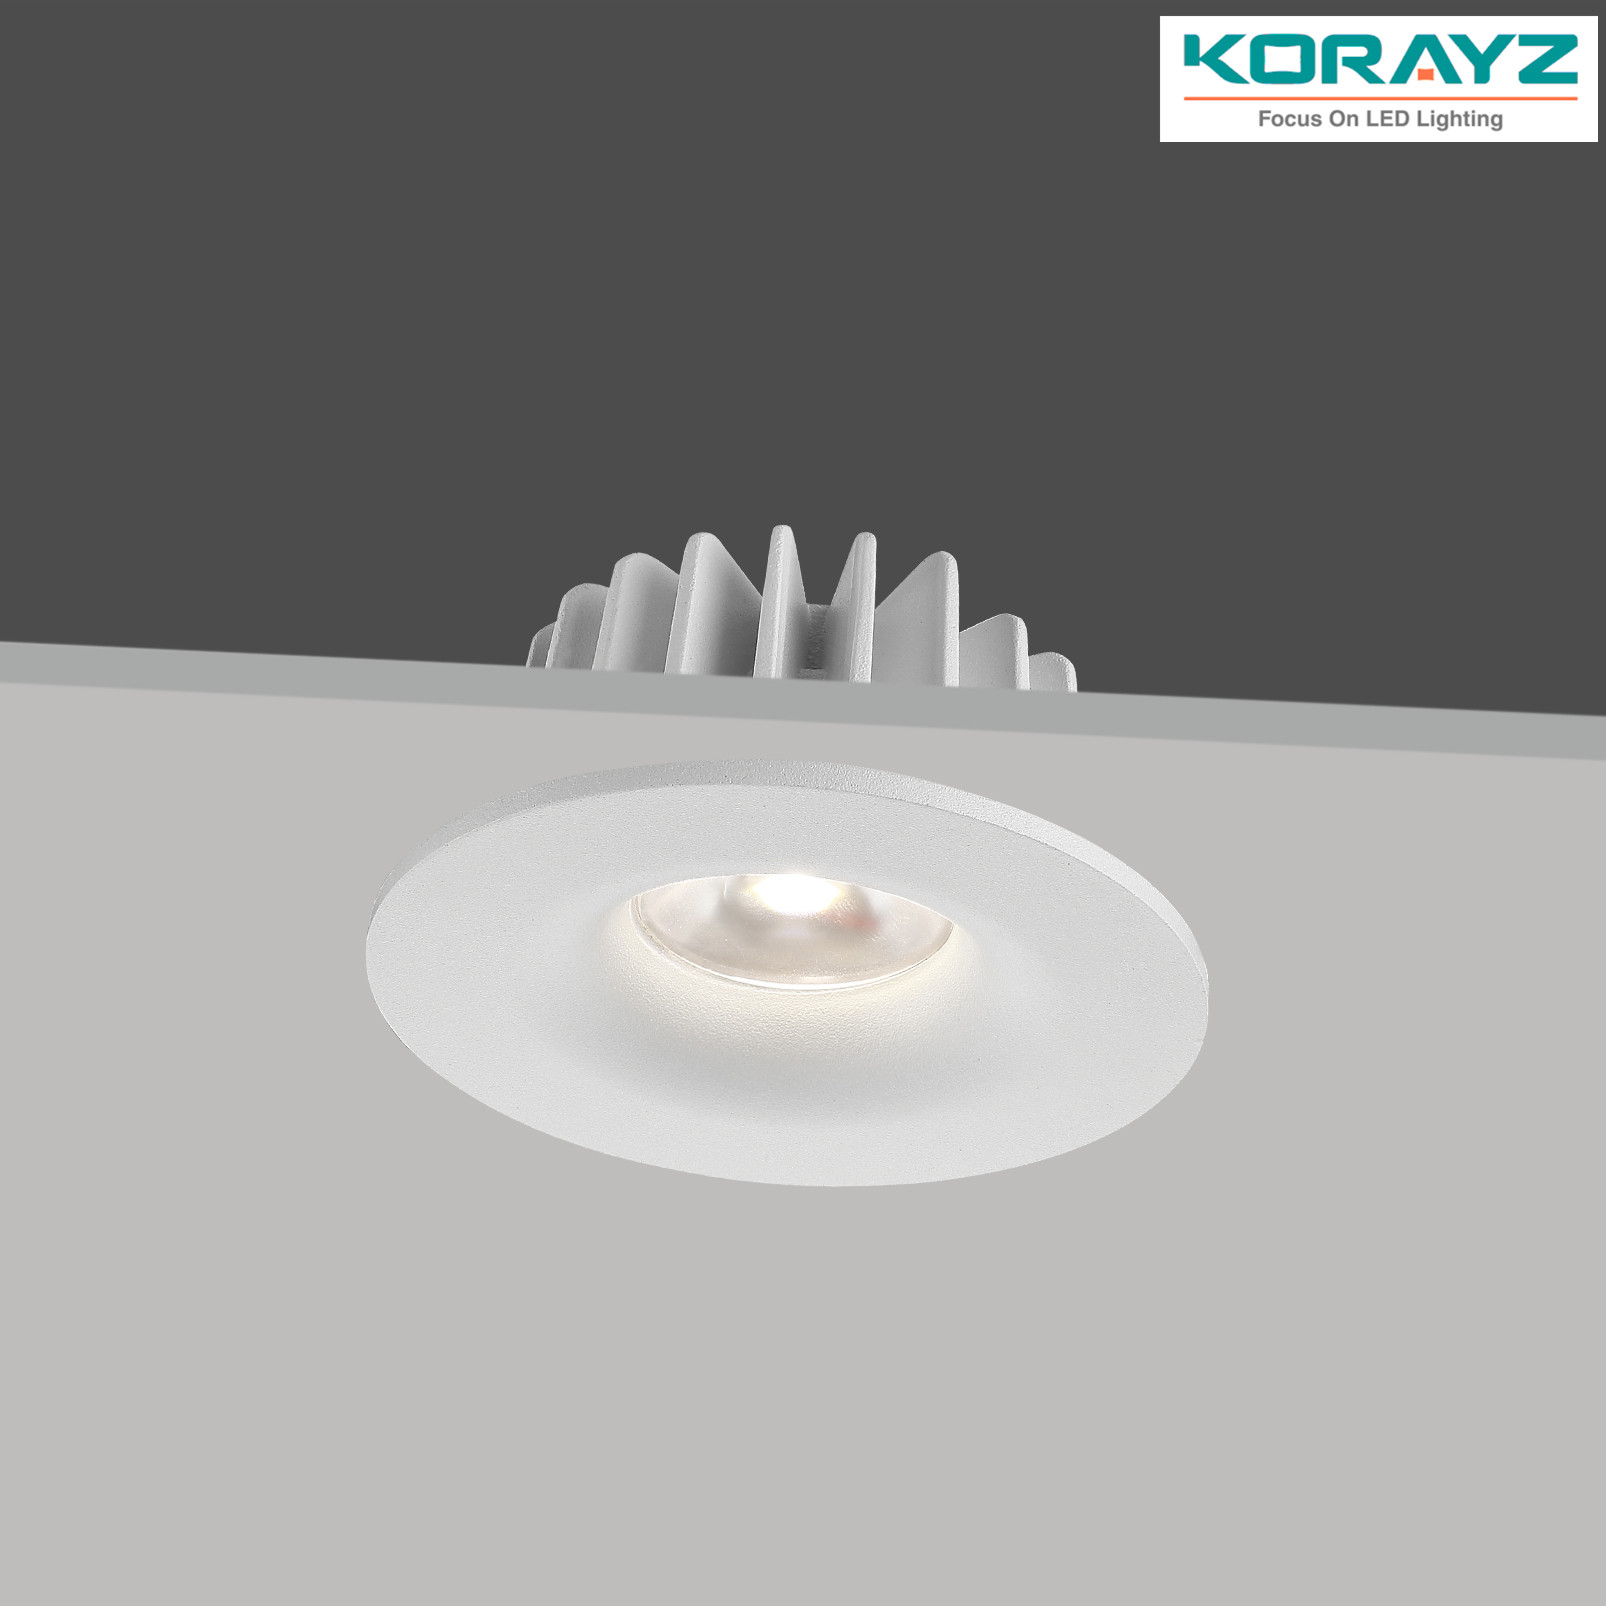 good quality both dimmable and non-dimmable led recessed lights